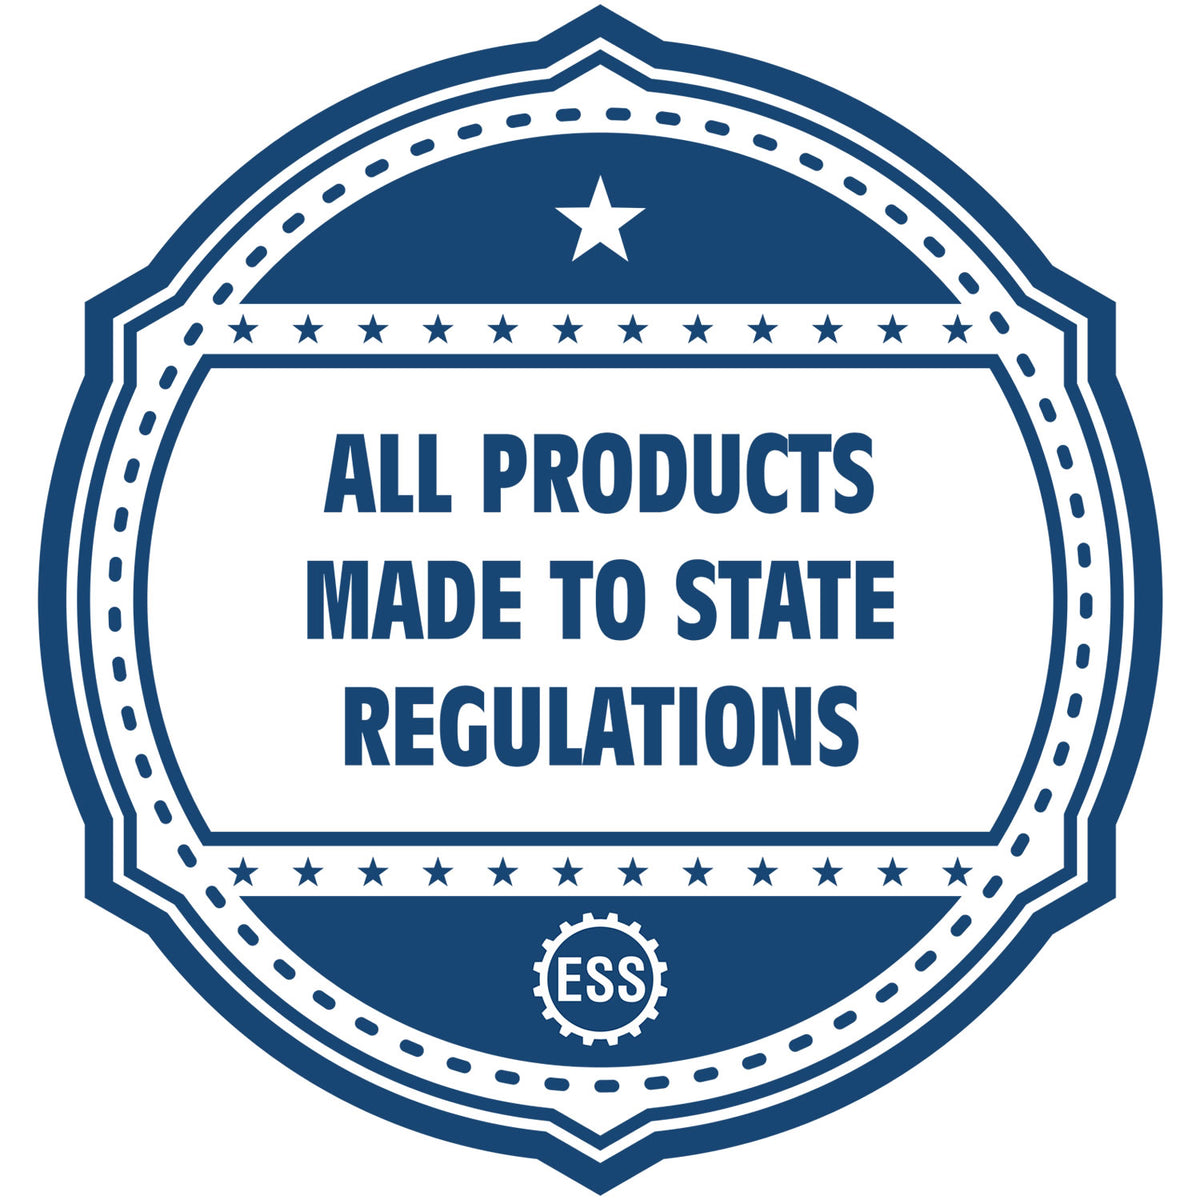 An icon or badge element for the Soft Tennessee Professional Engineer Seal showing that this product is made in compliance with state regulations.